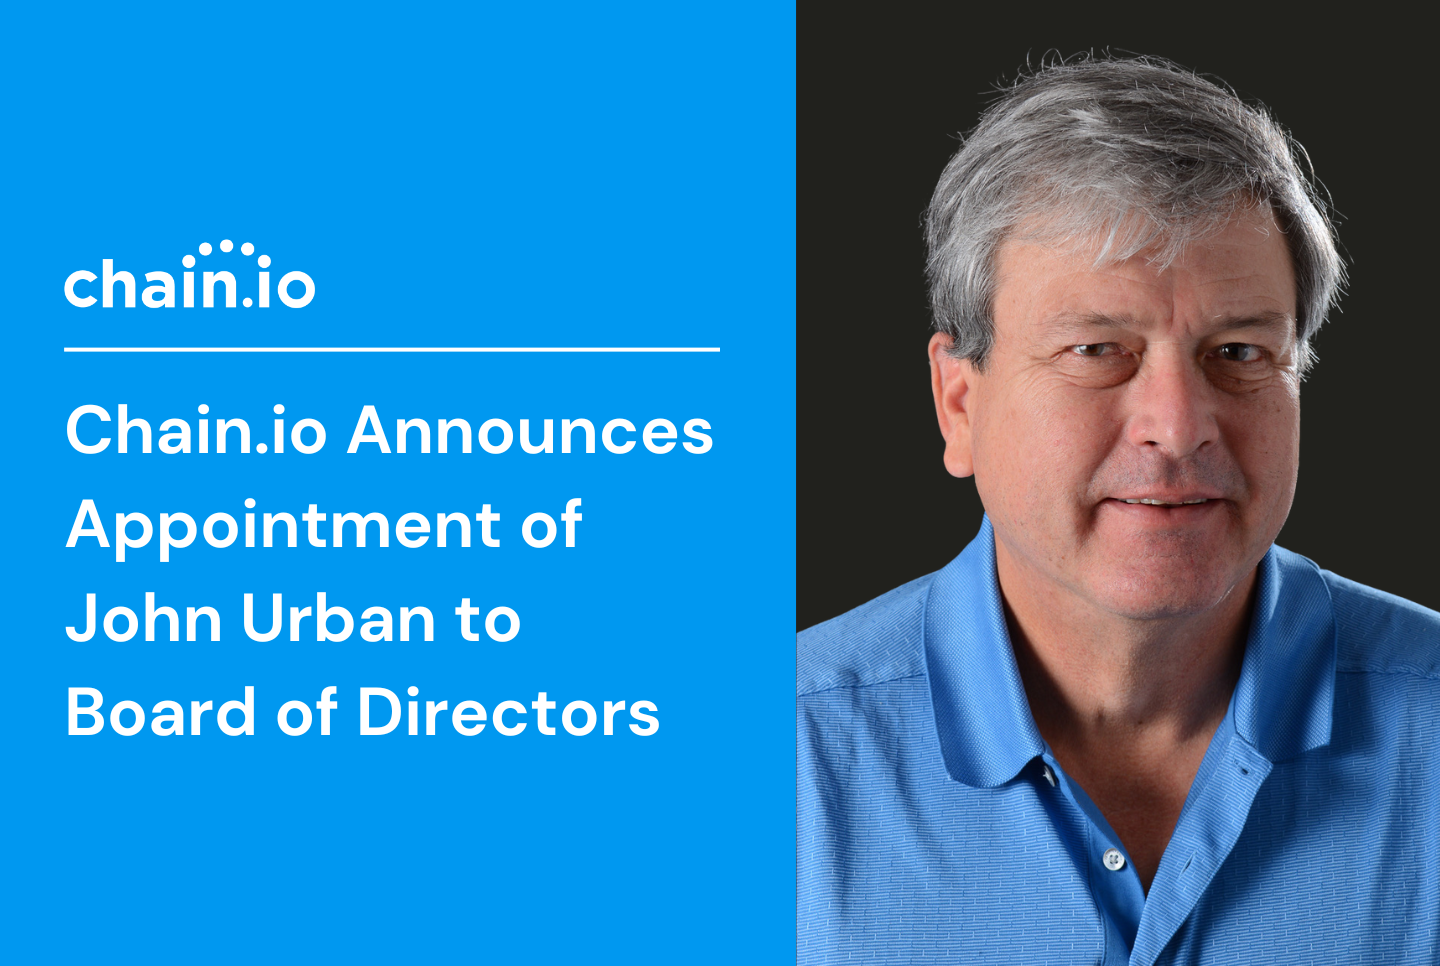 Chain.io Announces Appointment of John Urban to Board of Directors